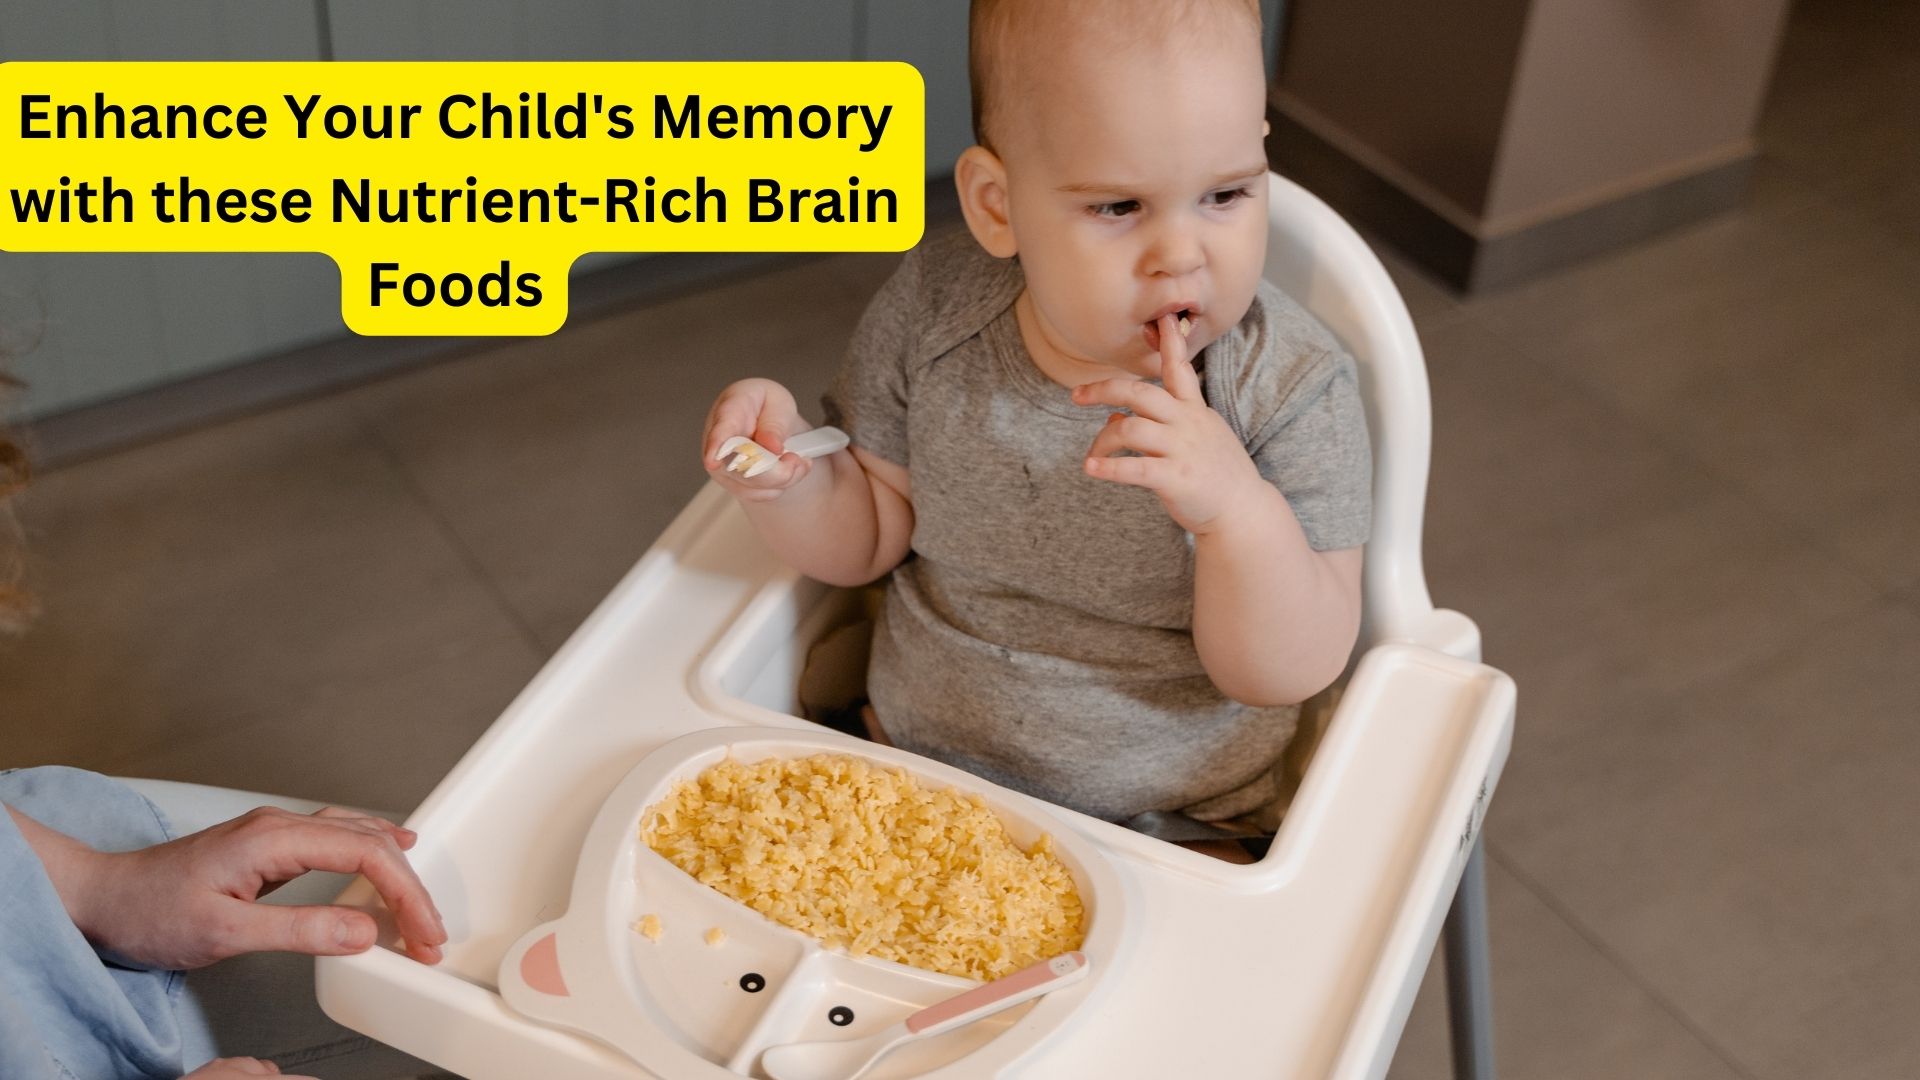 Enhance Your Child's Memory with these Nutrient-Rich Brain Foods